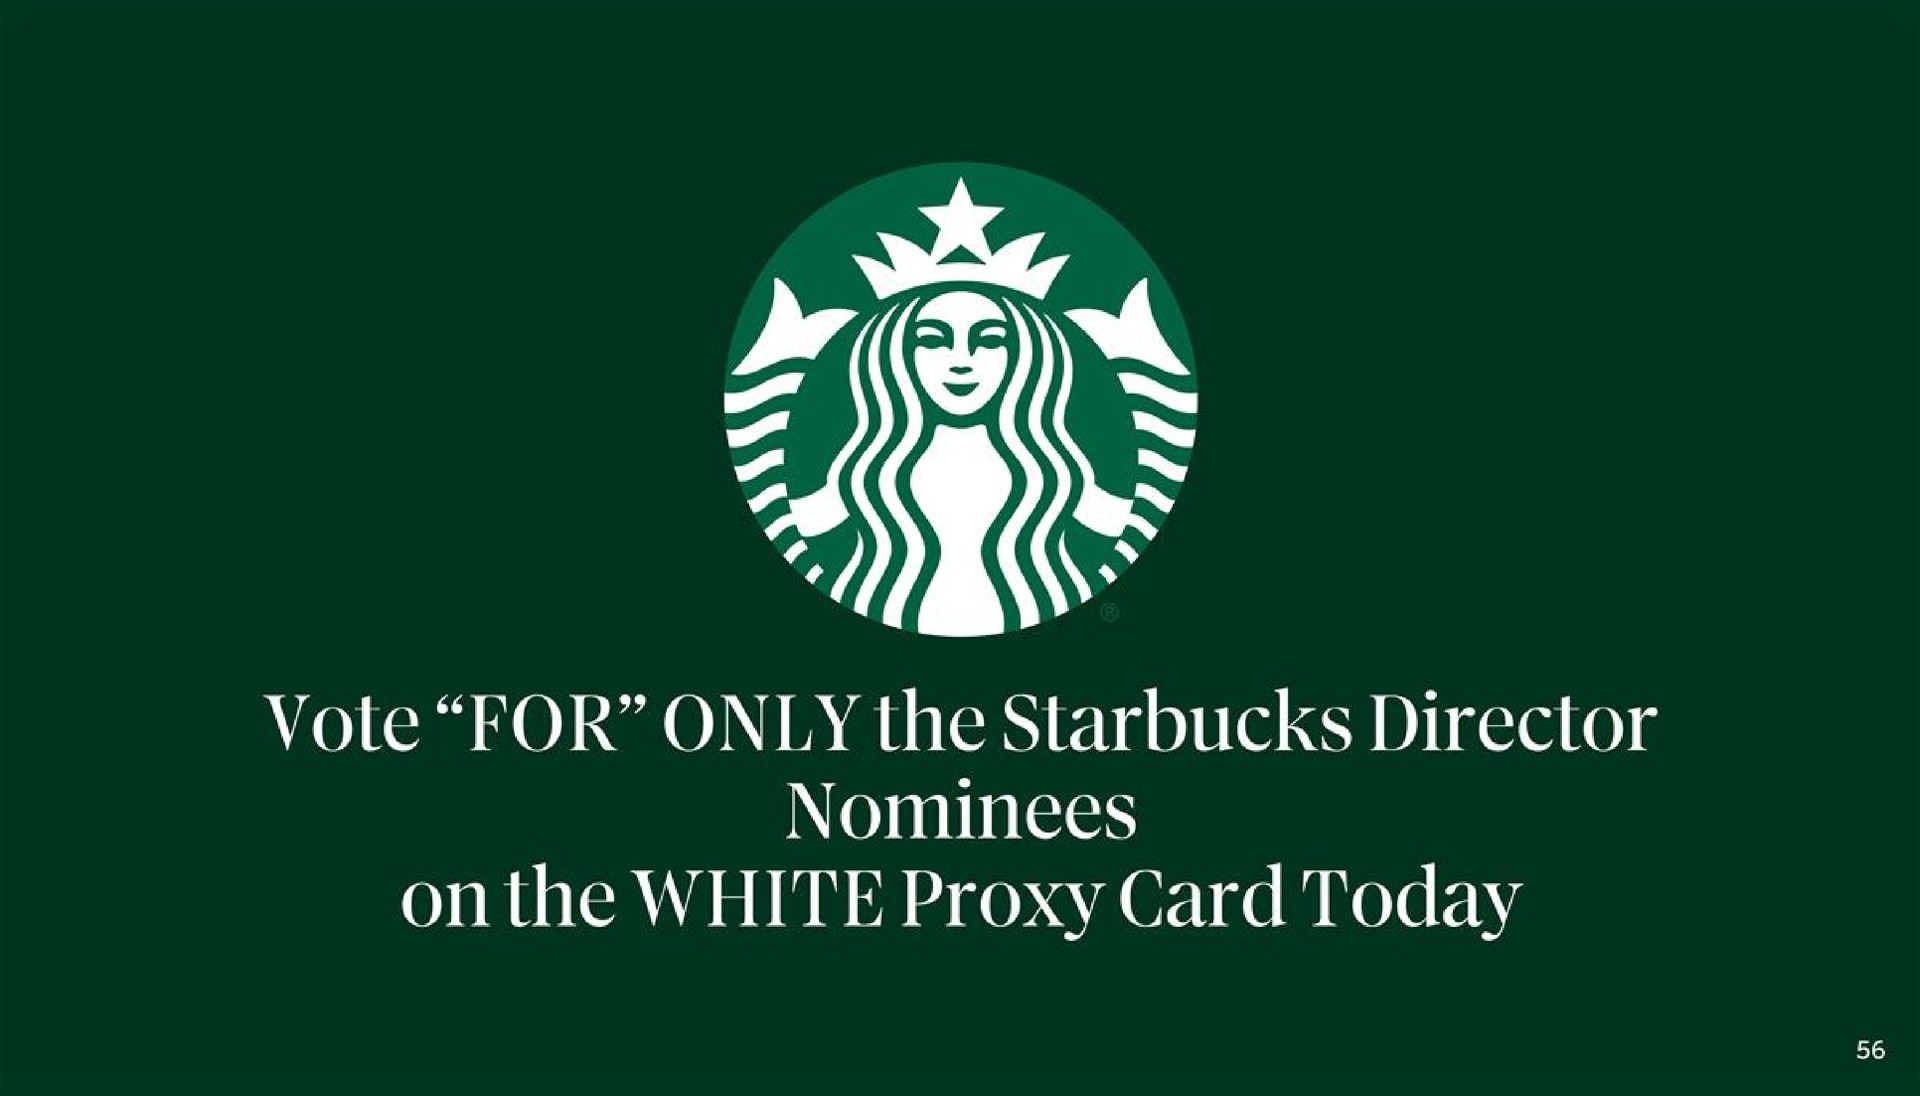 pie an vole for only the director nominees on the white proxy card today | Starbucks